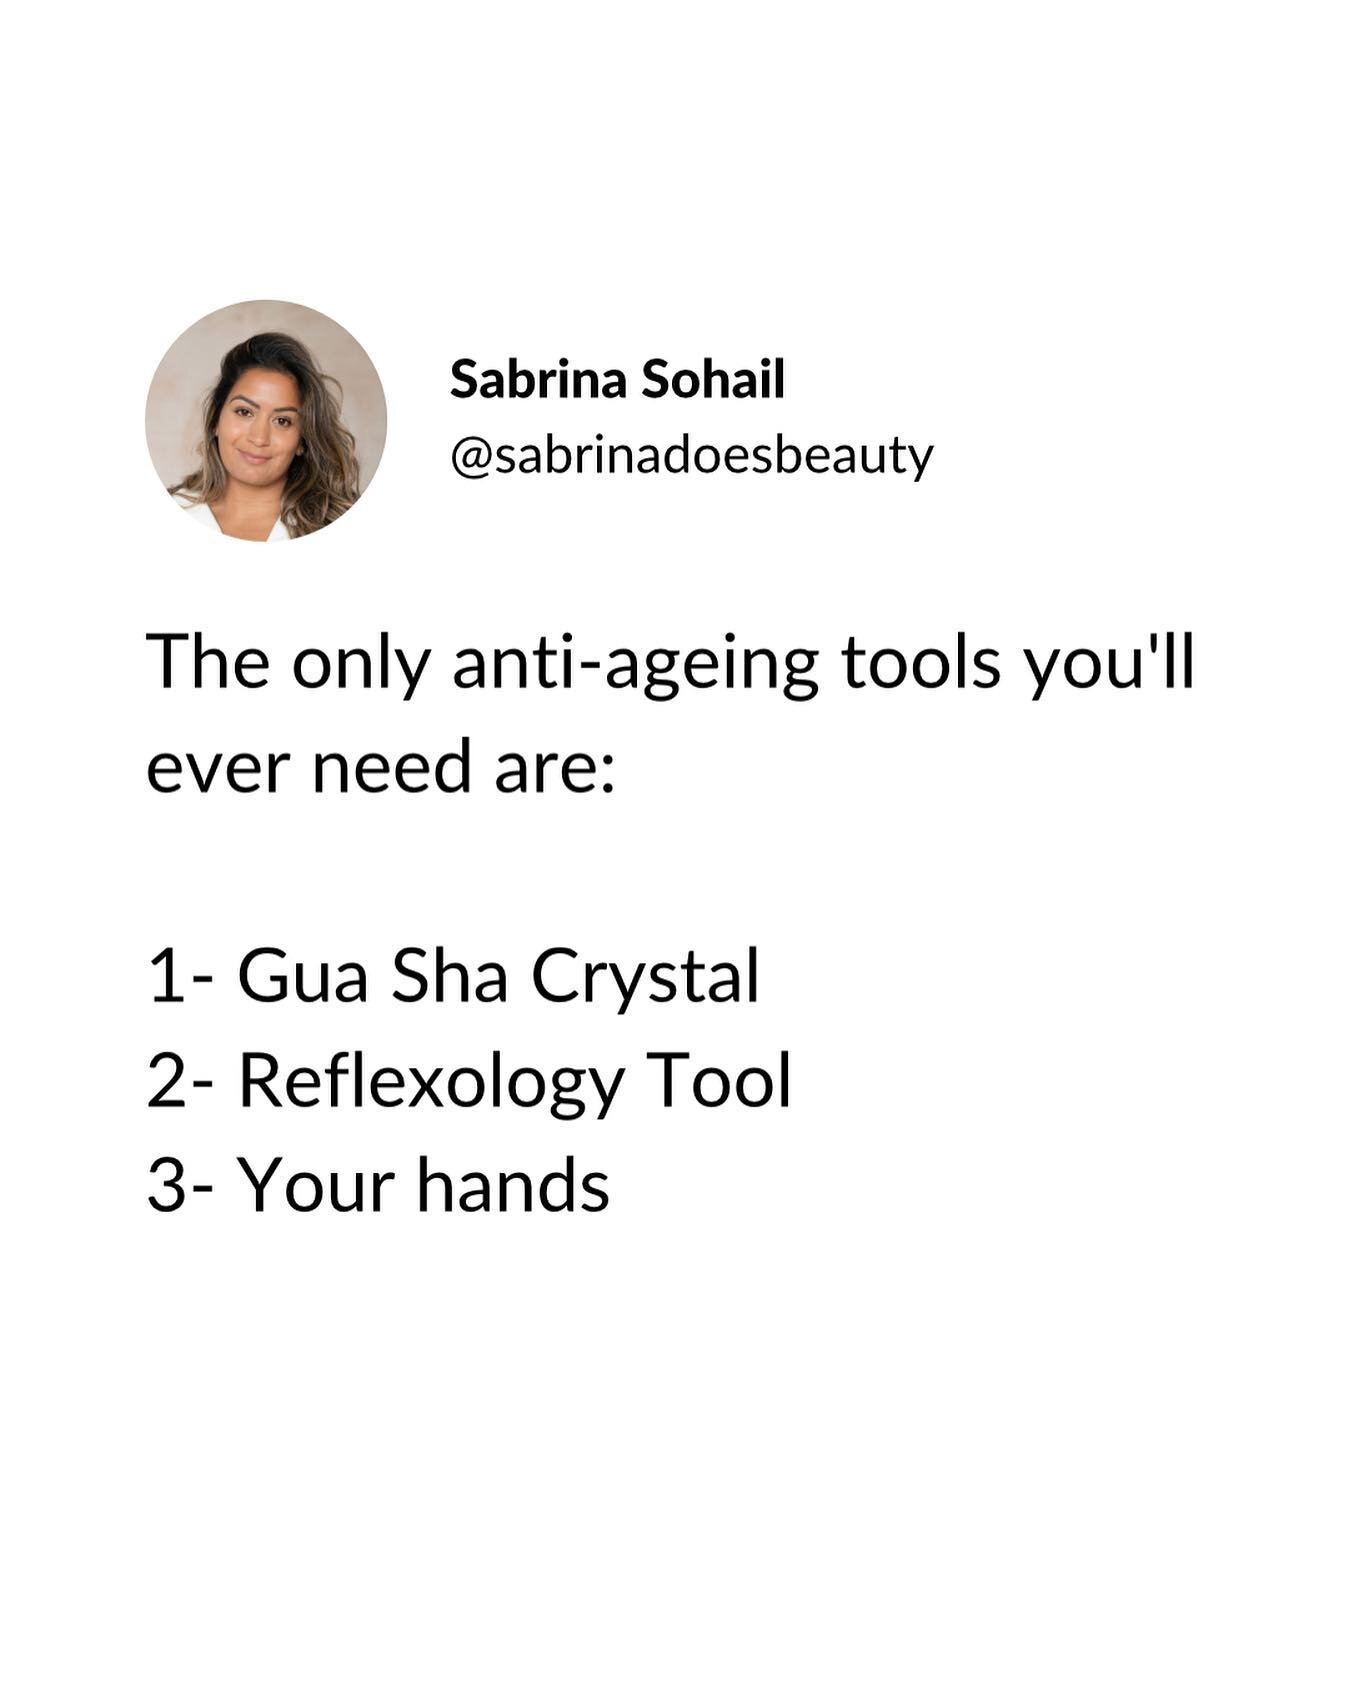 My 3 top anti-ageing tools 🤍

I love using a combination of these each week, for the following reasons: 

Gua Sha Crystal - this beauty secret dates back to the Ming dynasty. By gently scraping and pulling the skin in specific movements using this c